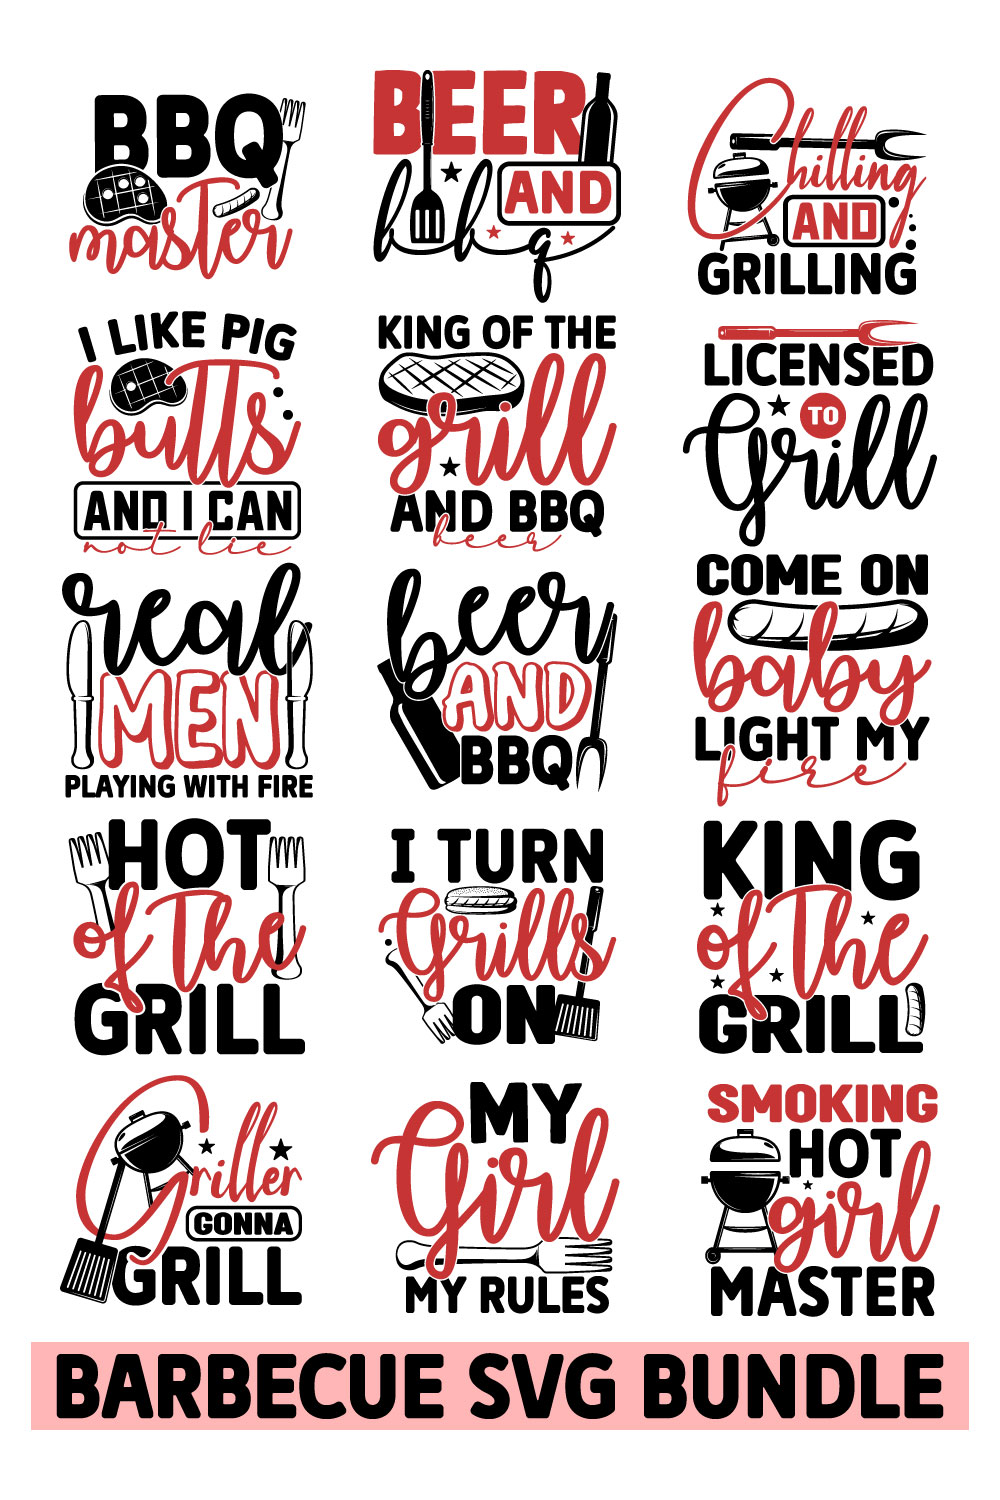 A selection of unique images for prints on the theme of barbecue